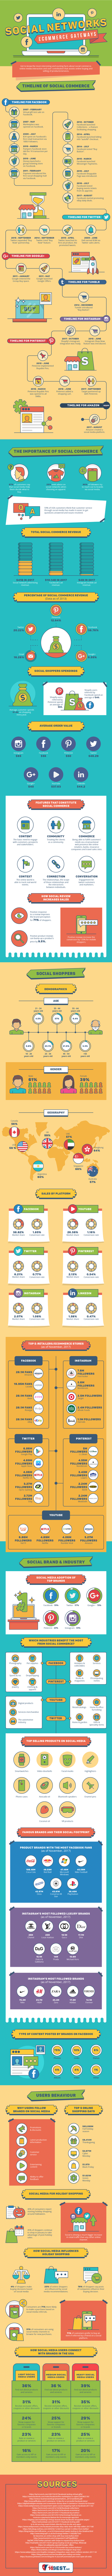 infographic social commerce